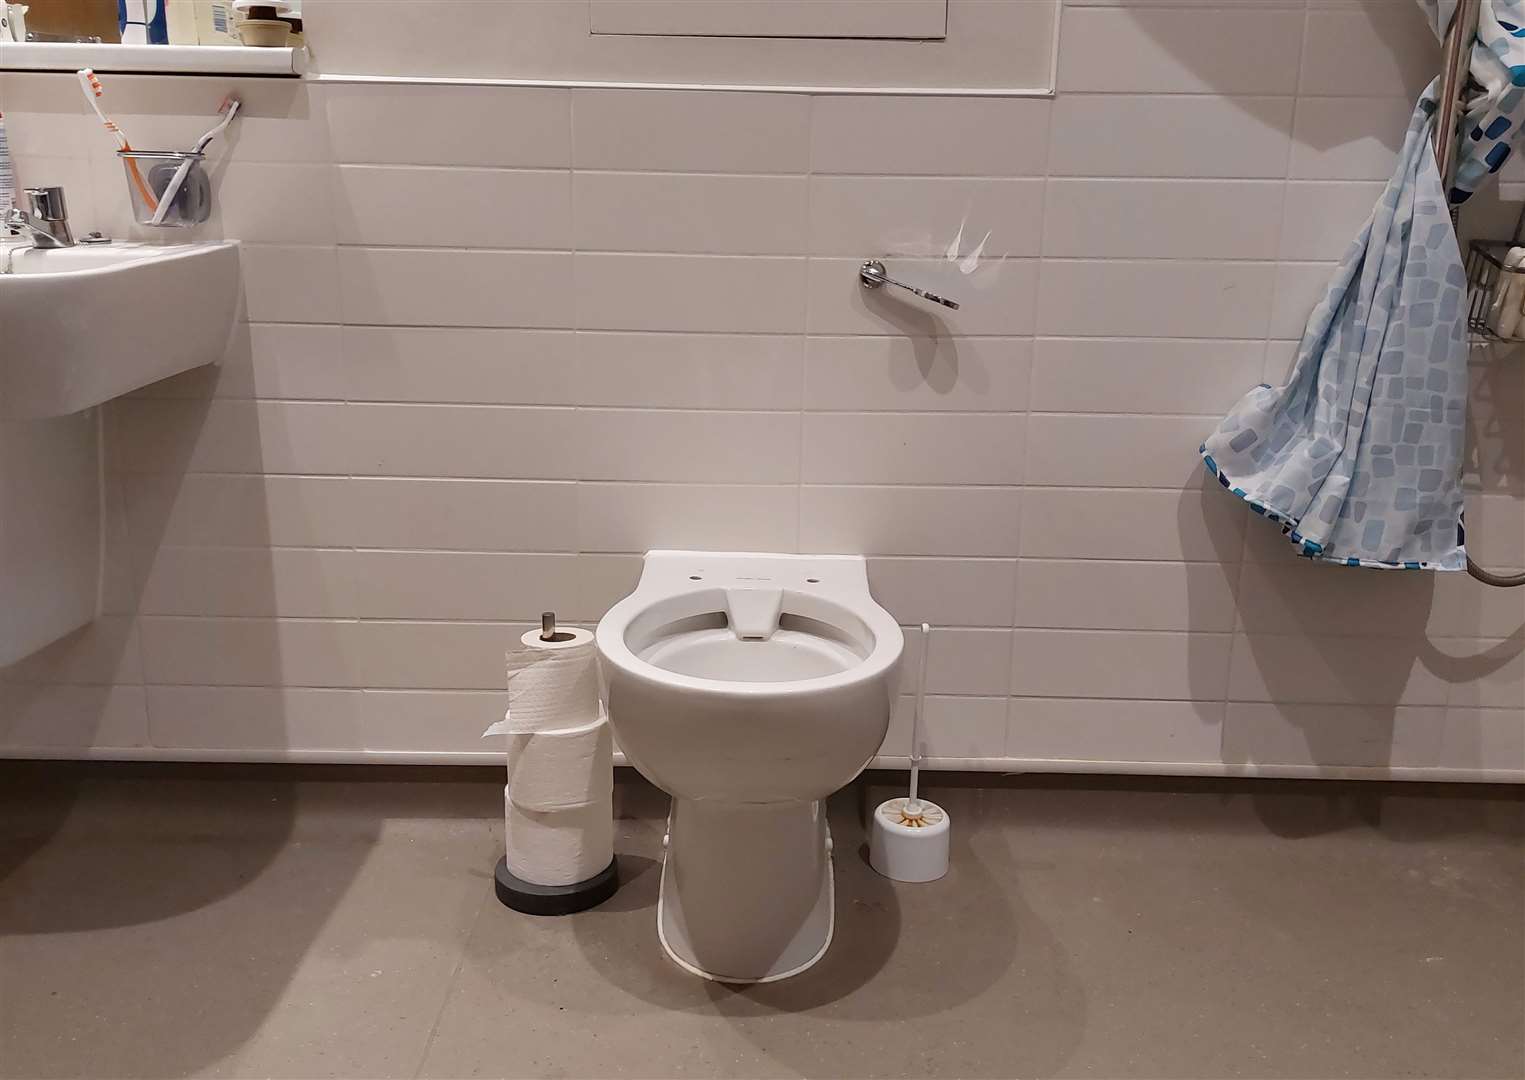 The toilet in Mr Ashworth’s Berry Place flat is not disability-adapted